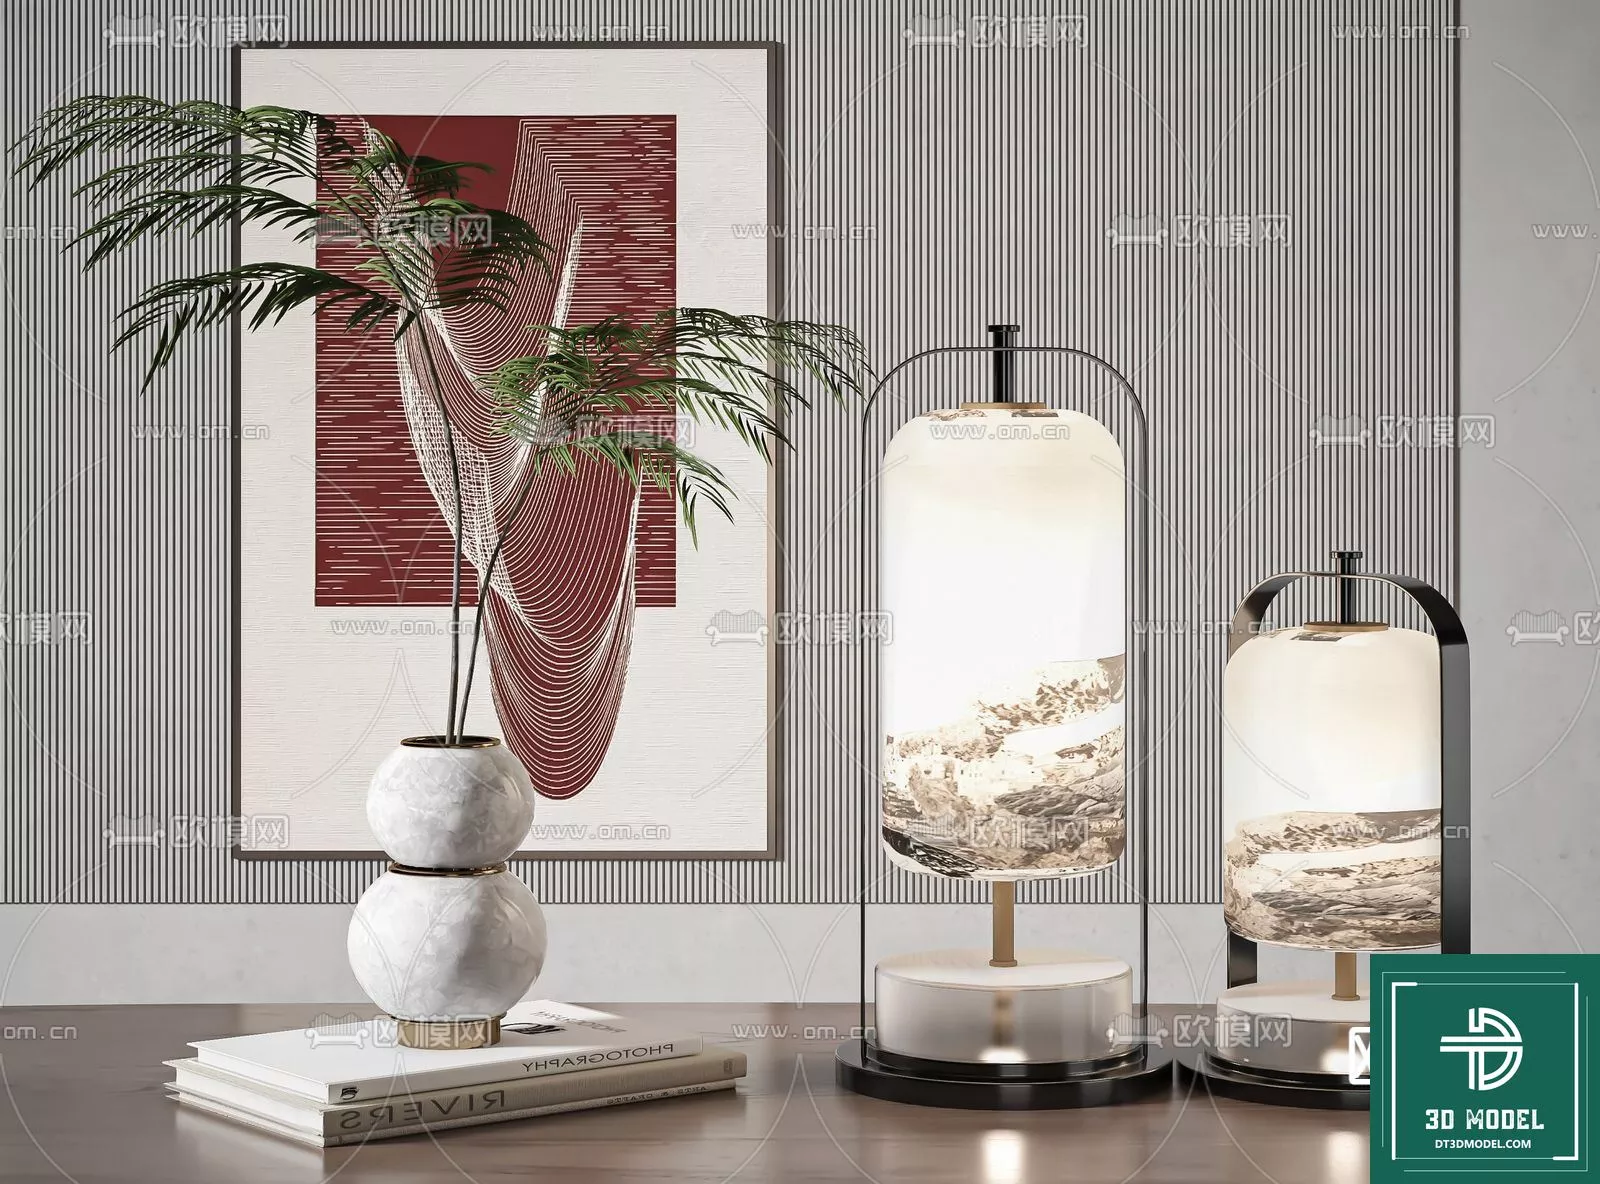 MODERN TABLE LAMP - SKETCHUP 3D MODEL - VRAY OR ENSCAPE - ID14570